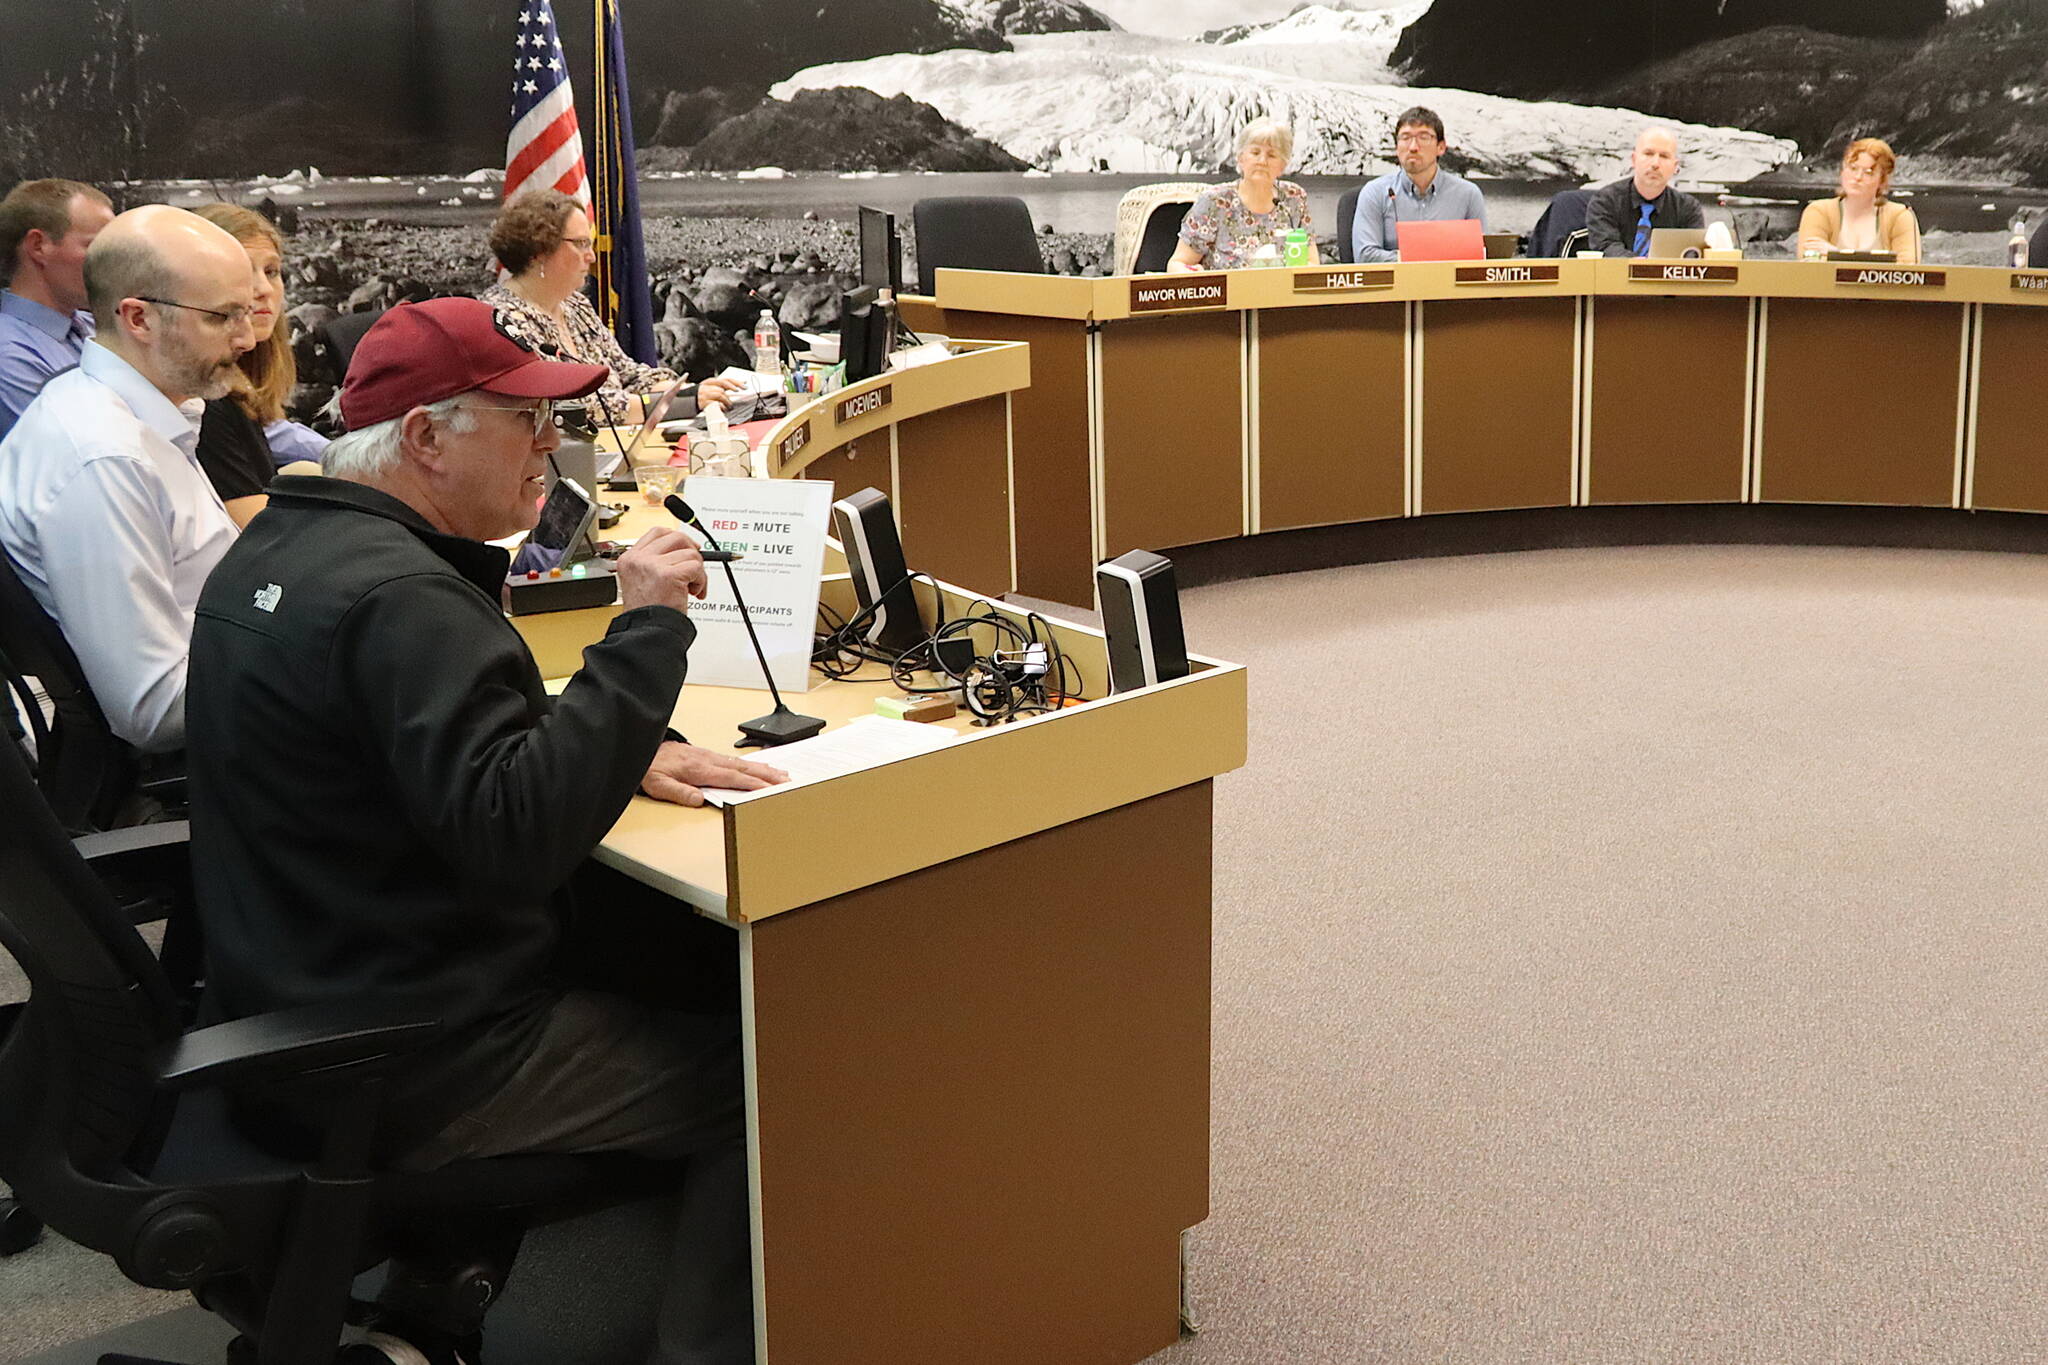 Charles VanKirk expresses his opposition to a proposed increase in the mill rate during a Juneau Assembly meeting on Monday night. (Mark Sabbatini / Juneau Empire)